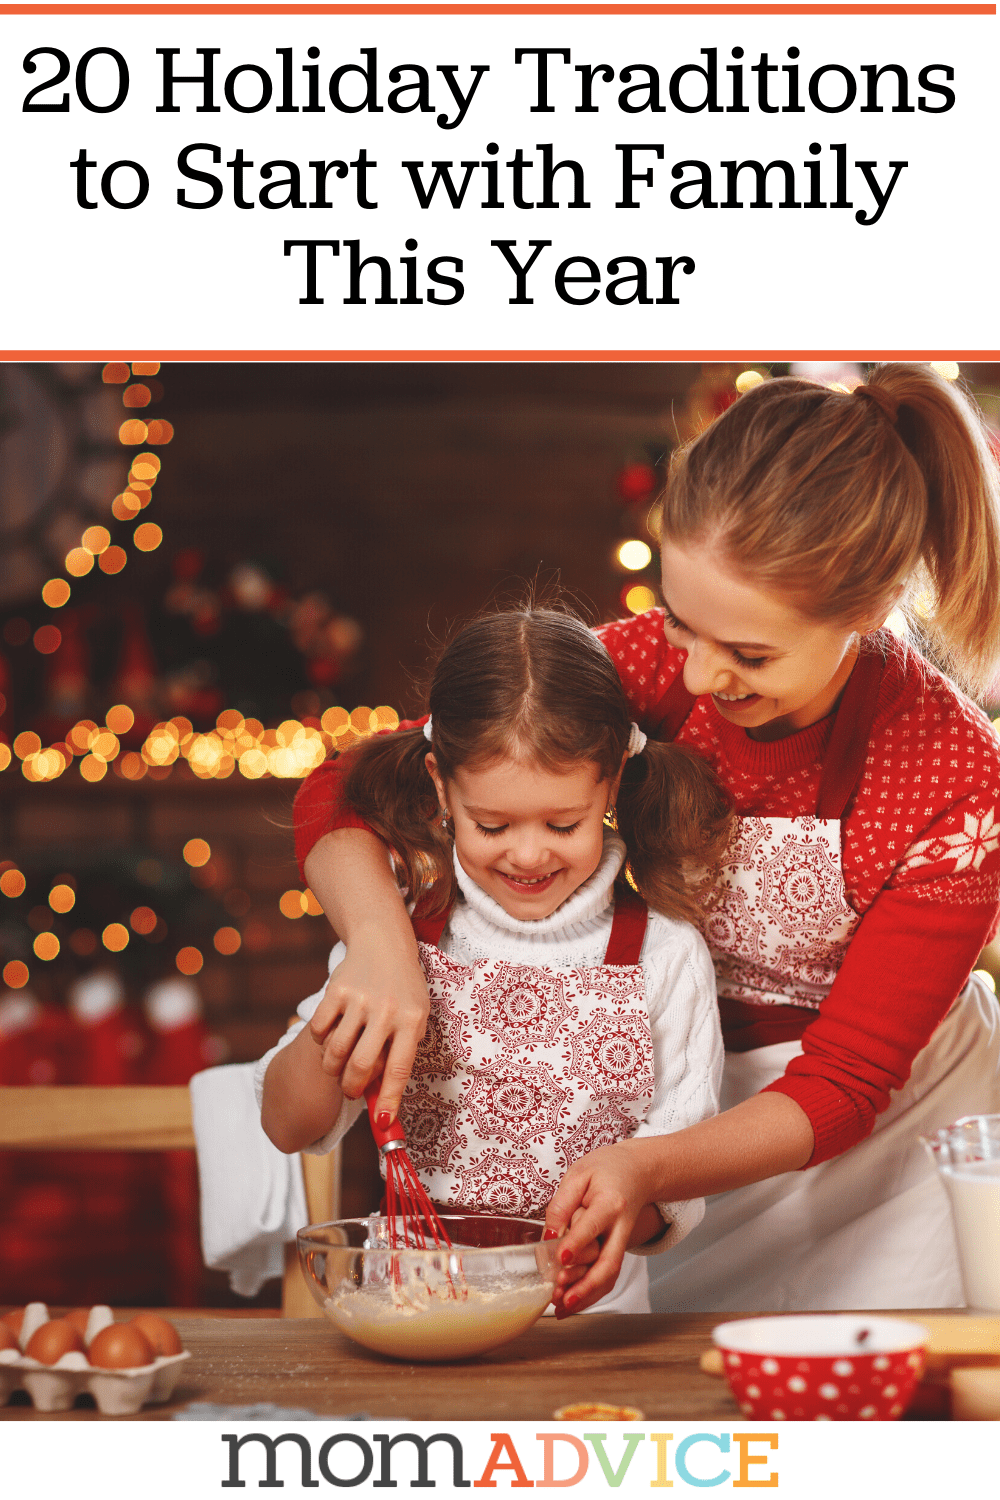 20 Holiday Traditions to Start with Your Family This Year